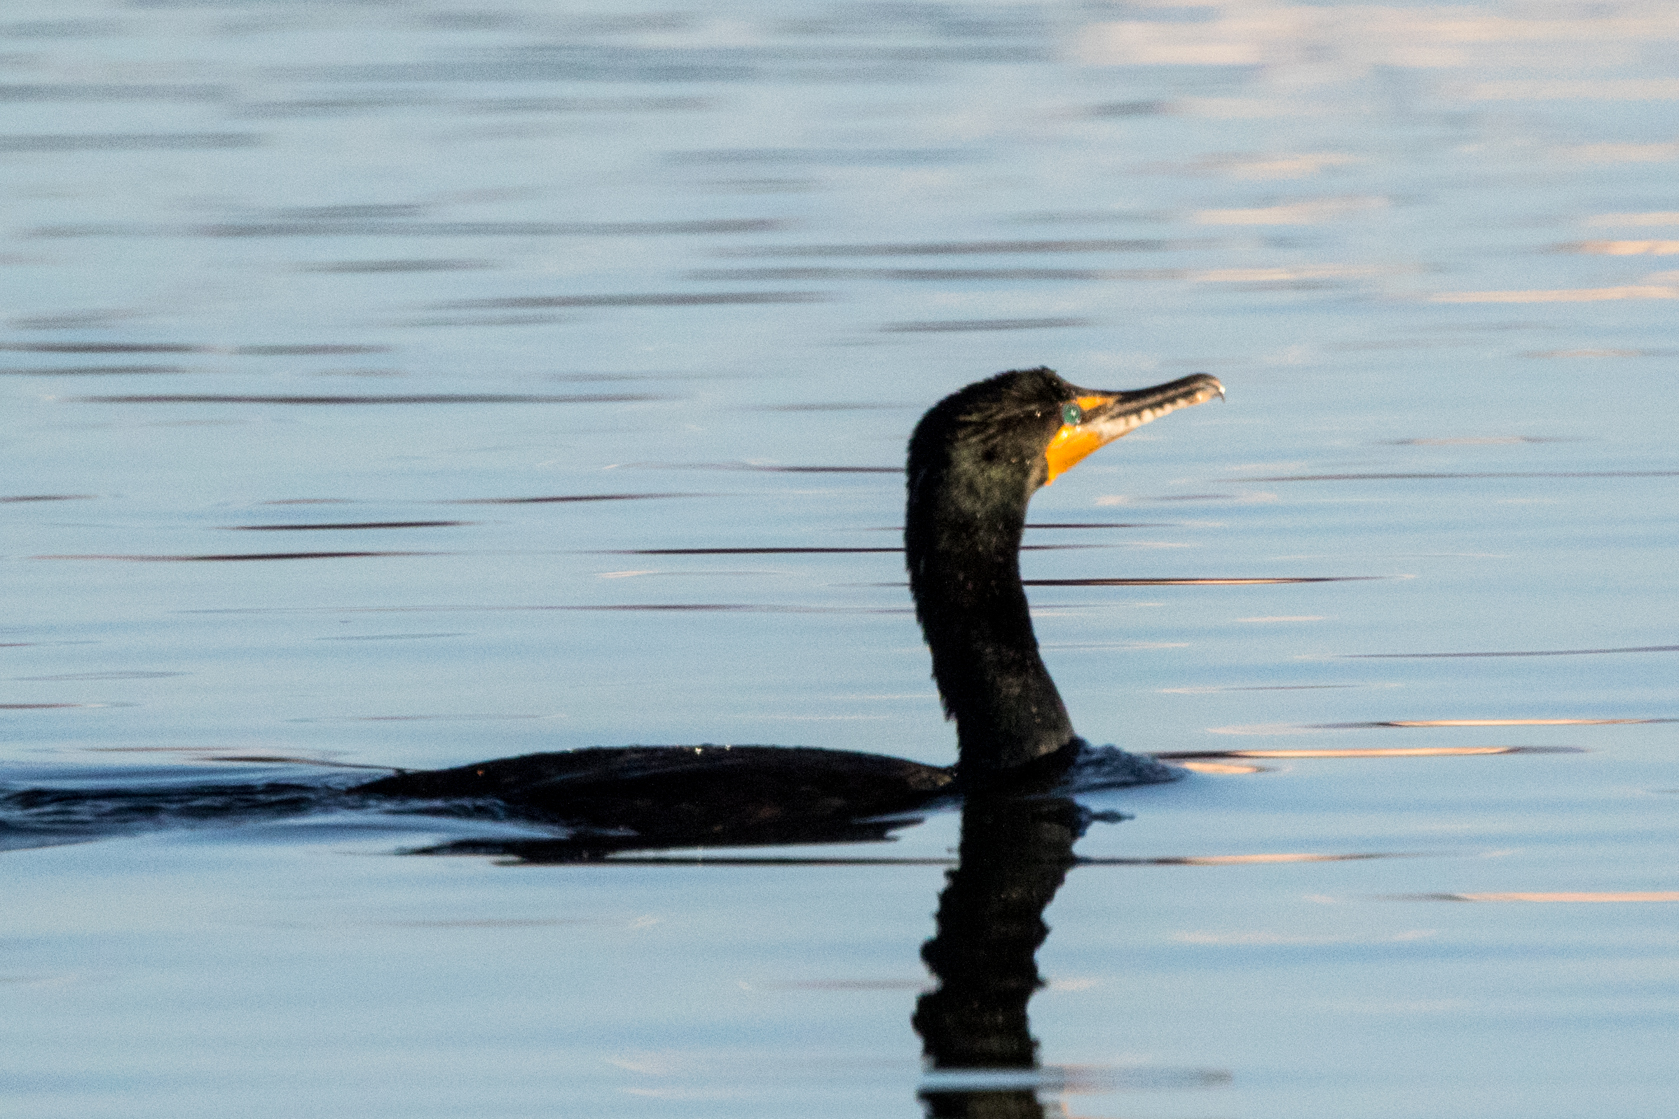 a single long necked bird swimming in a lake